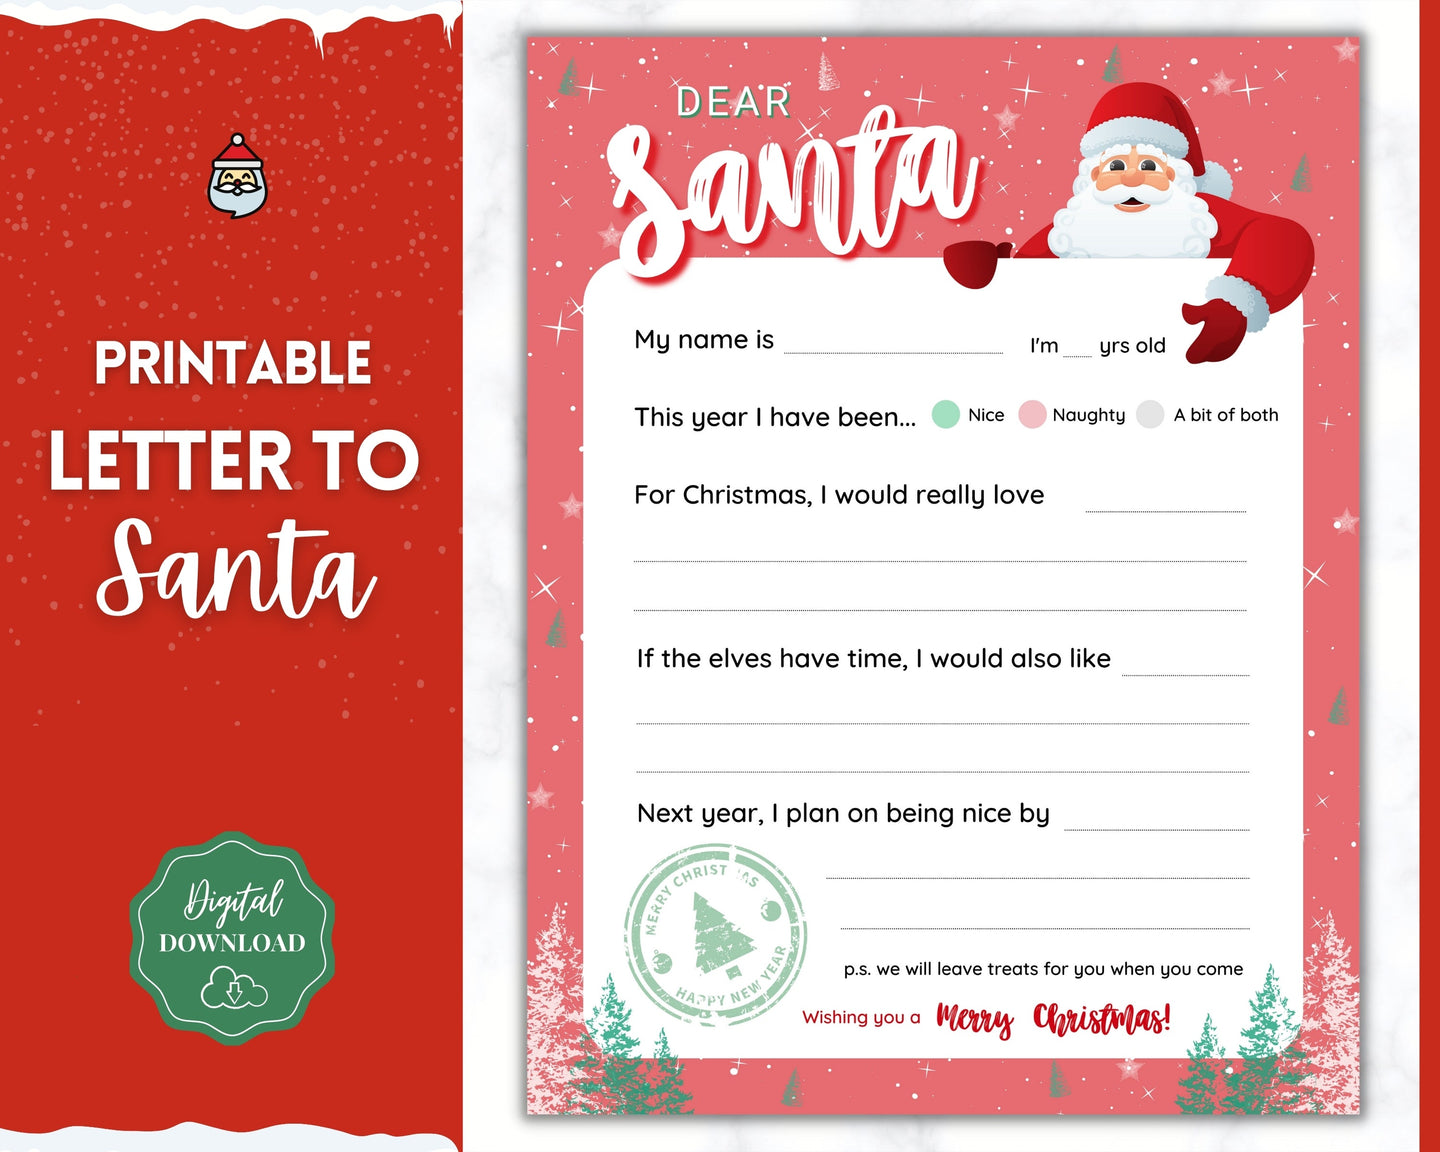 Letter to Santa Claus, RED Kids Christmas Wish List Printable, Father Christmas Letter, Dear Santa Letter, Holidays, North Pole Mail, Nice List